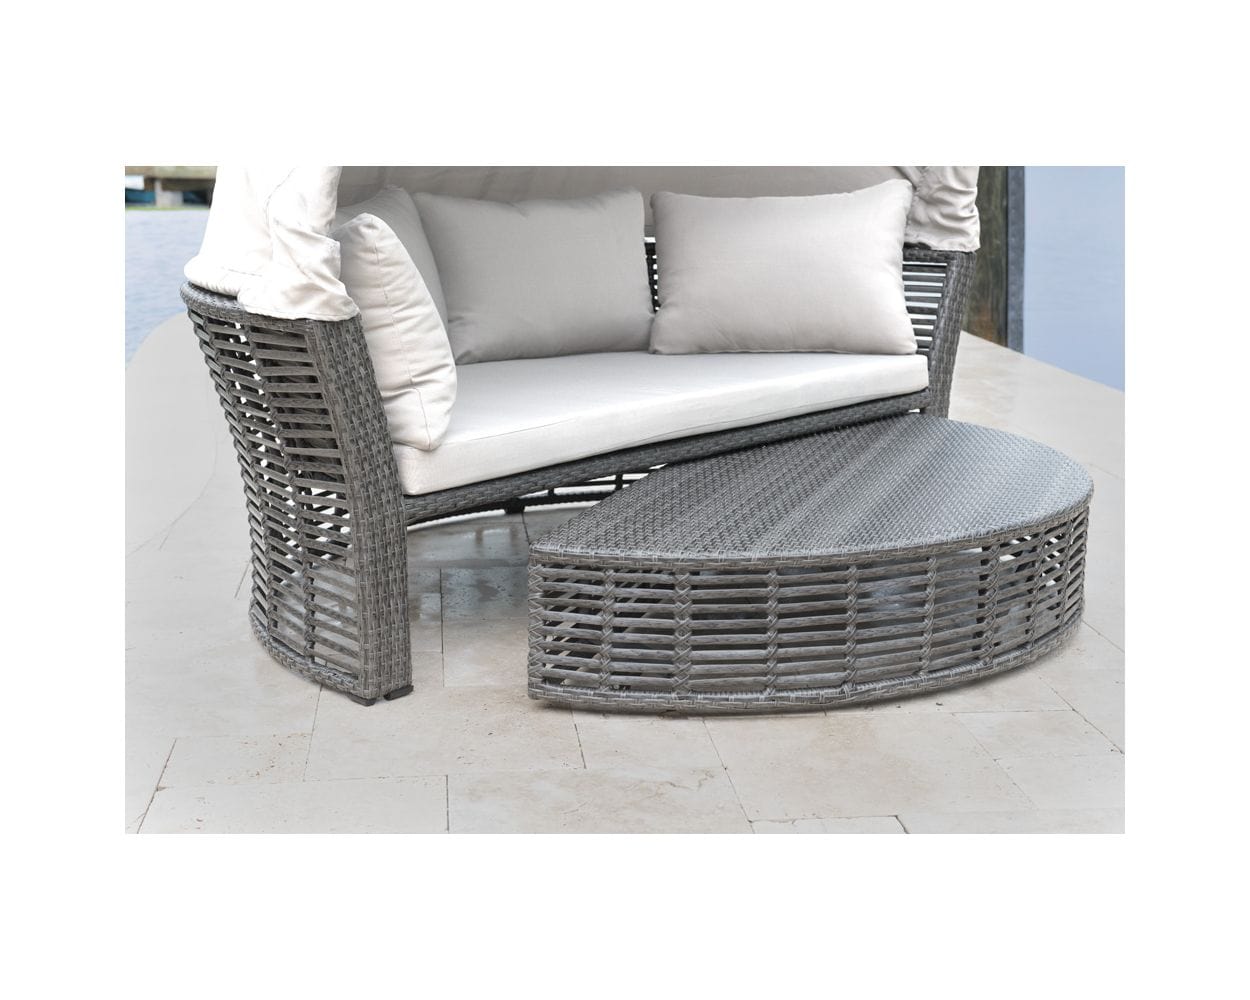 Dreamline Outdoor Furniture Poolside Sunbed/Daybed With Cushion